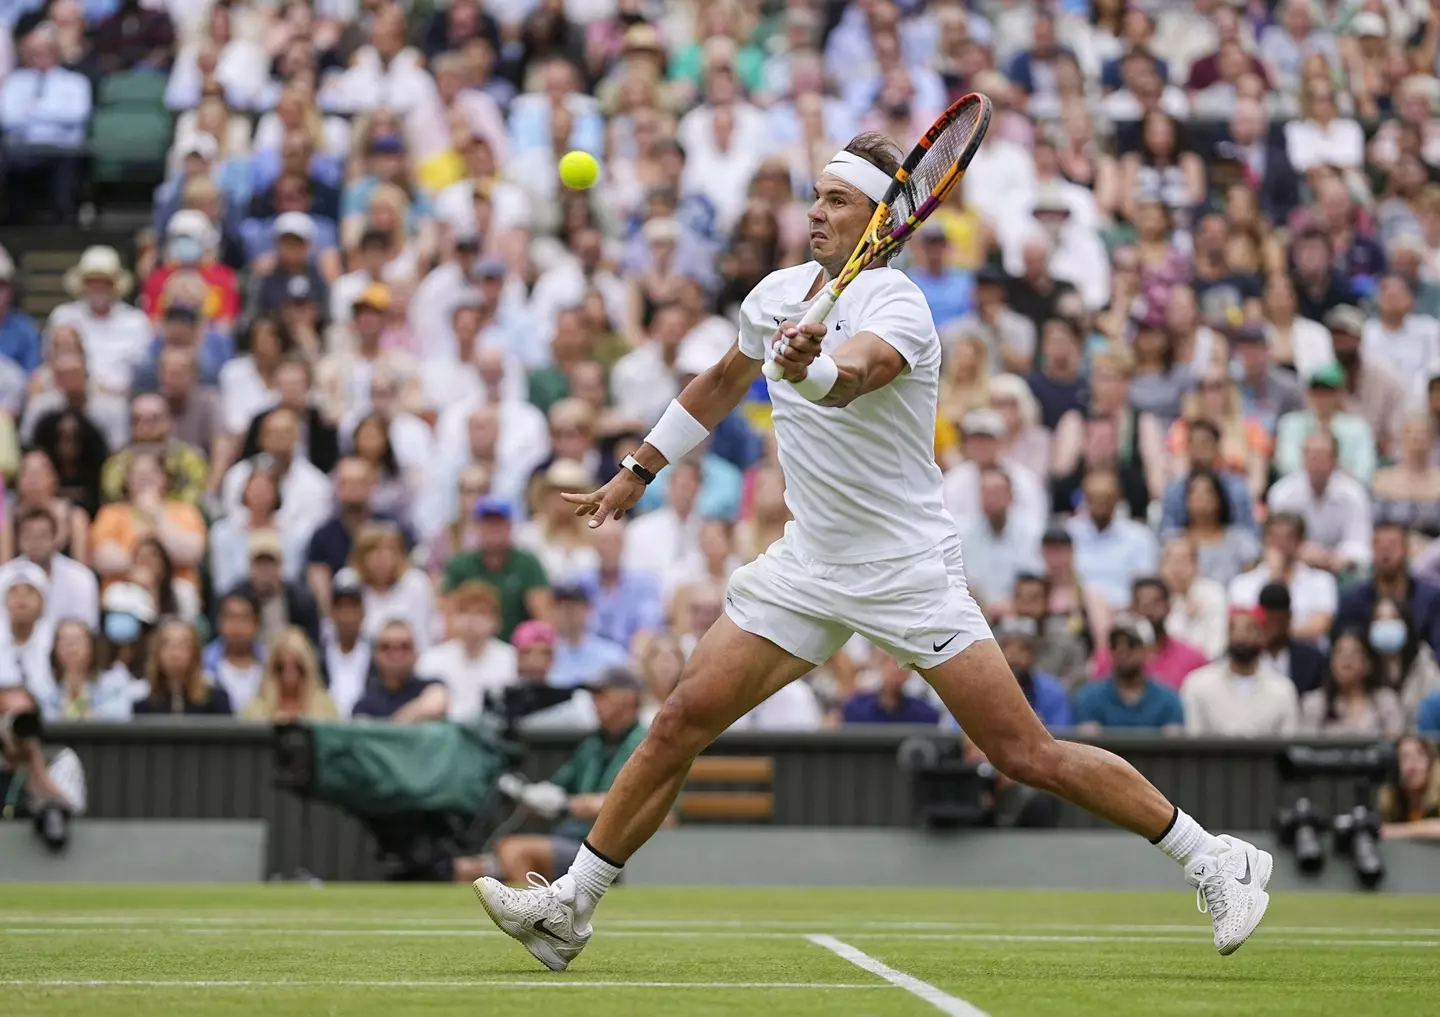 Nadal had to battle hard just to beat Fritz but it came at a cost. Image: Alamy